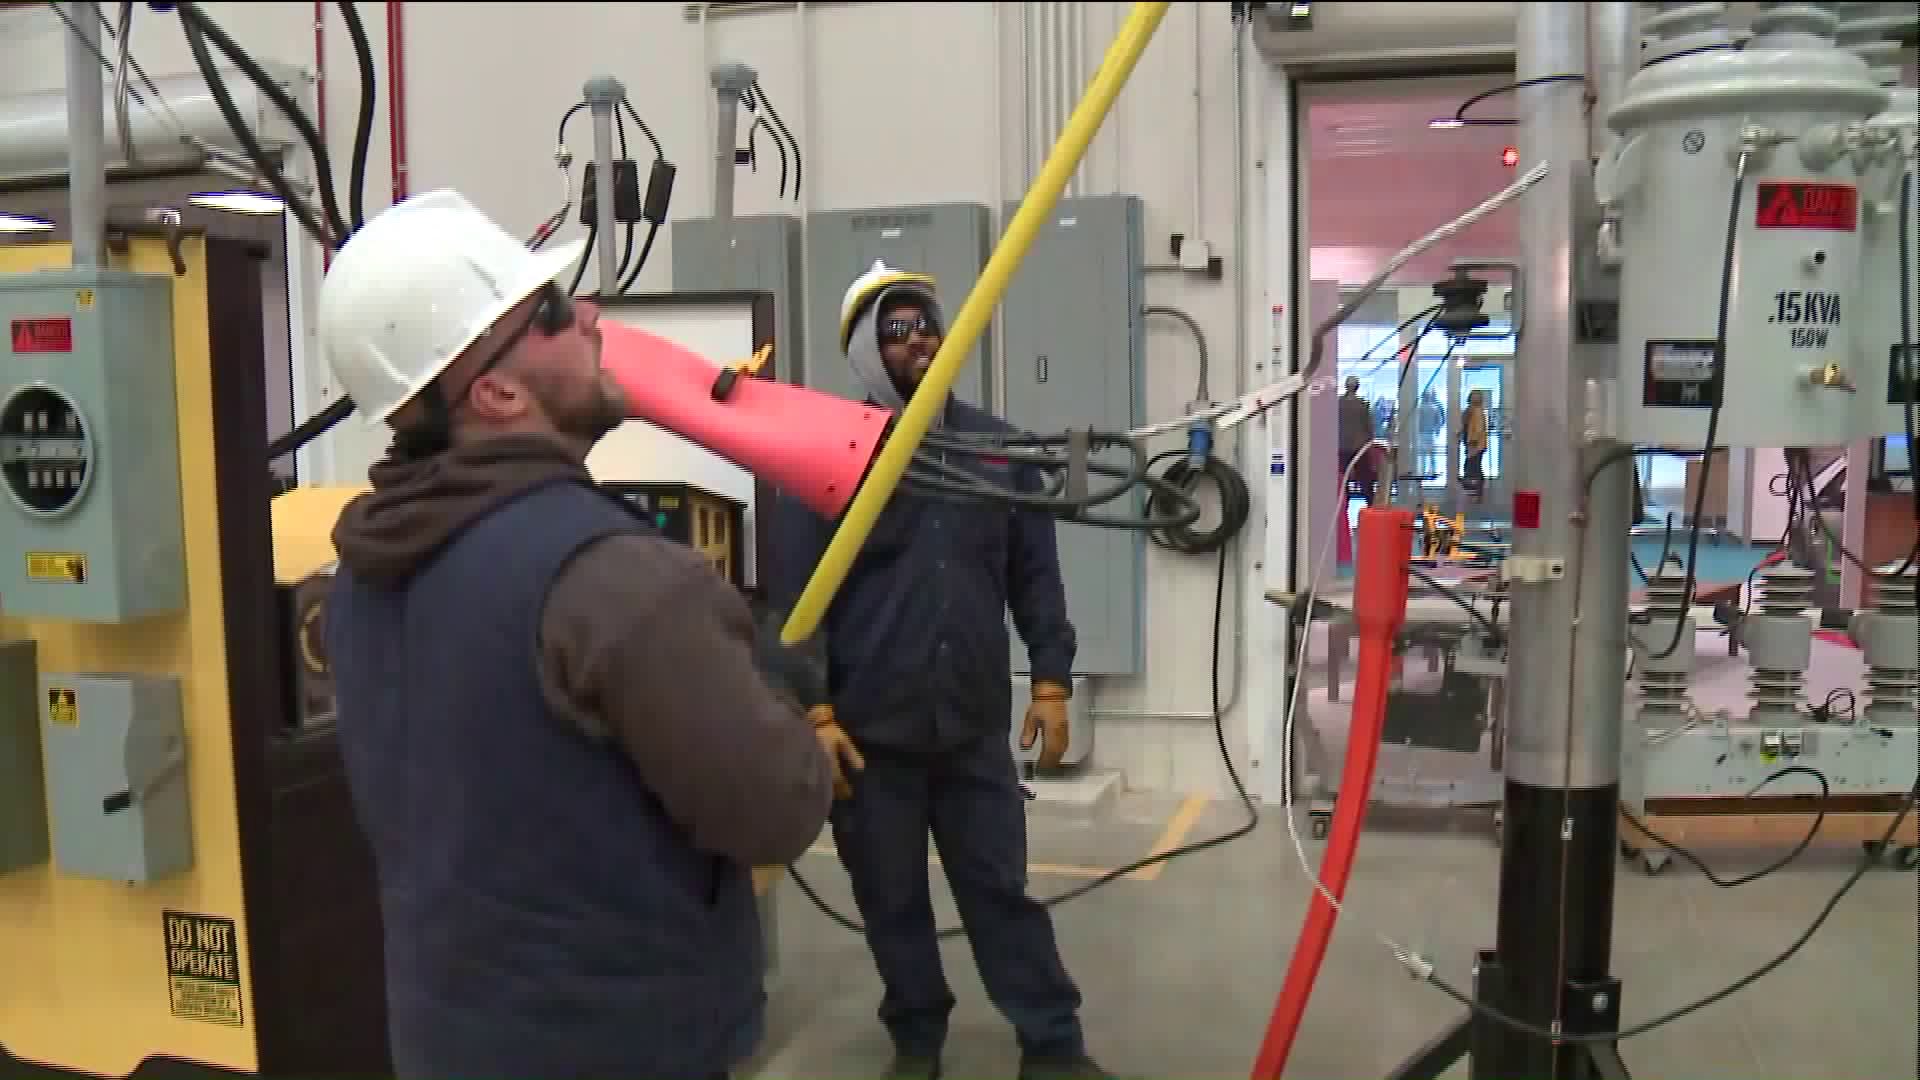 Around Town visits the ComEd Training Center